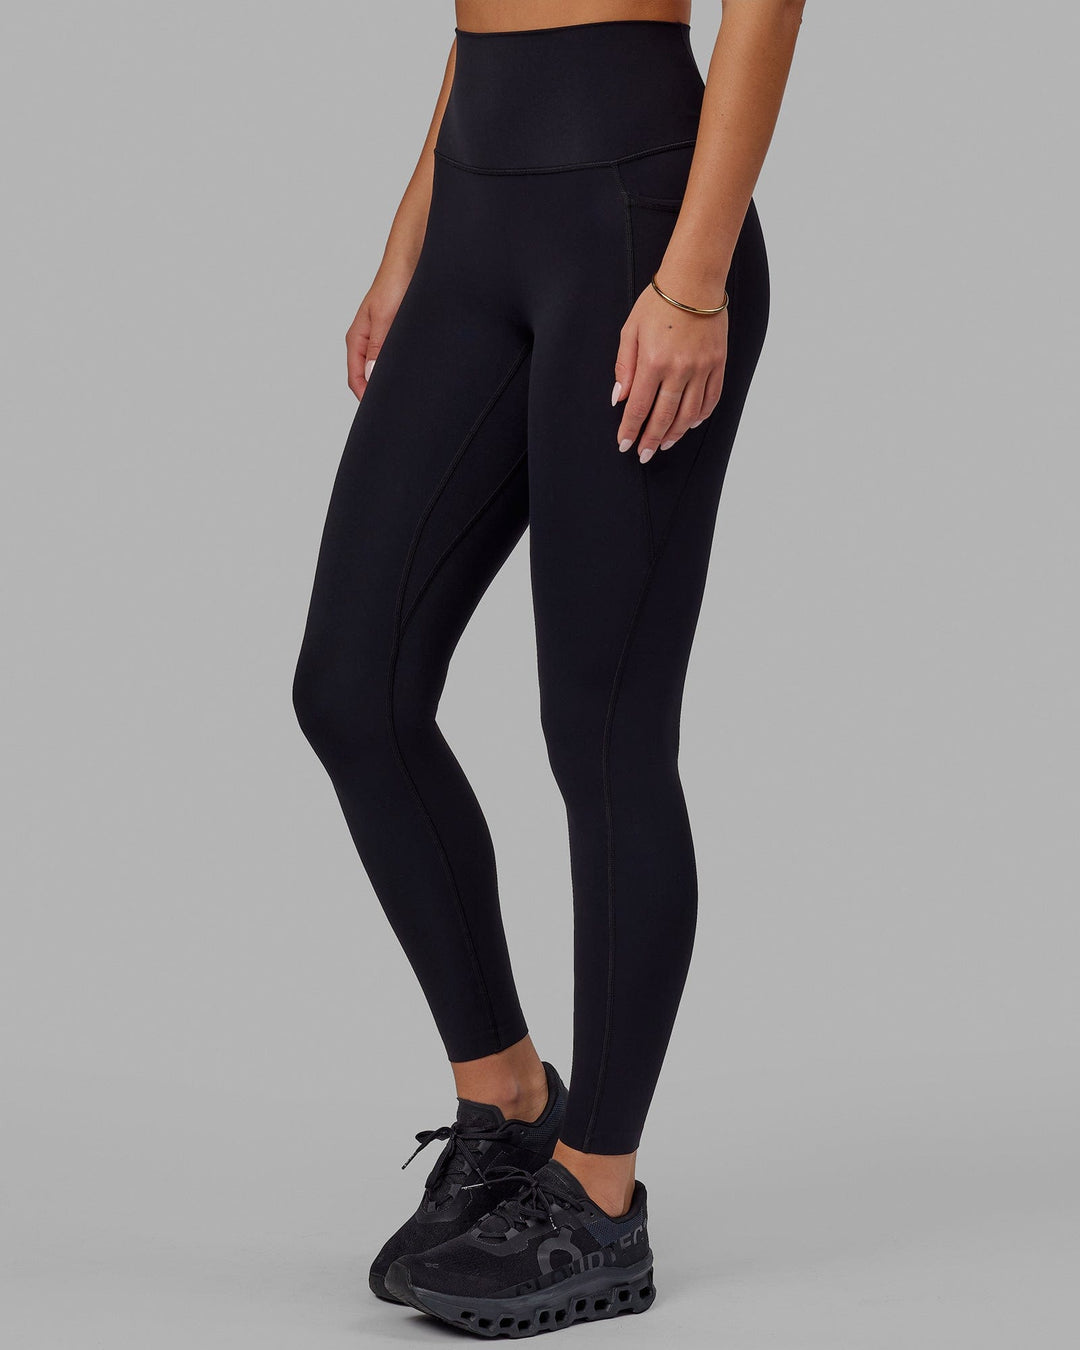 Woman wearing Elixir Full Length Tight With Pockets - Black